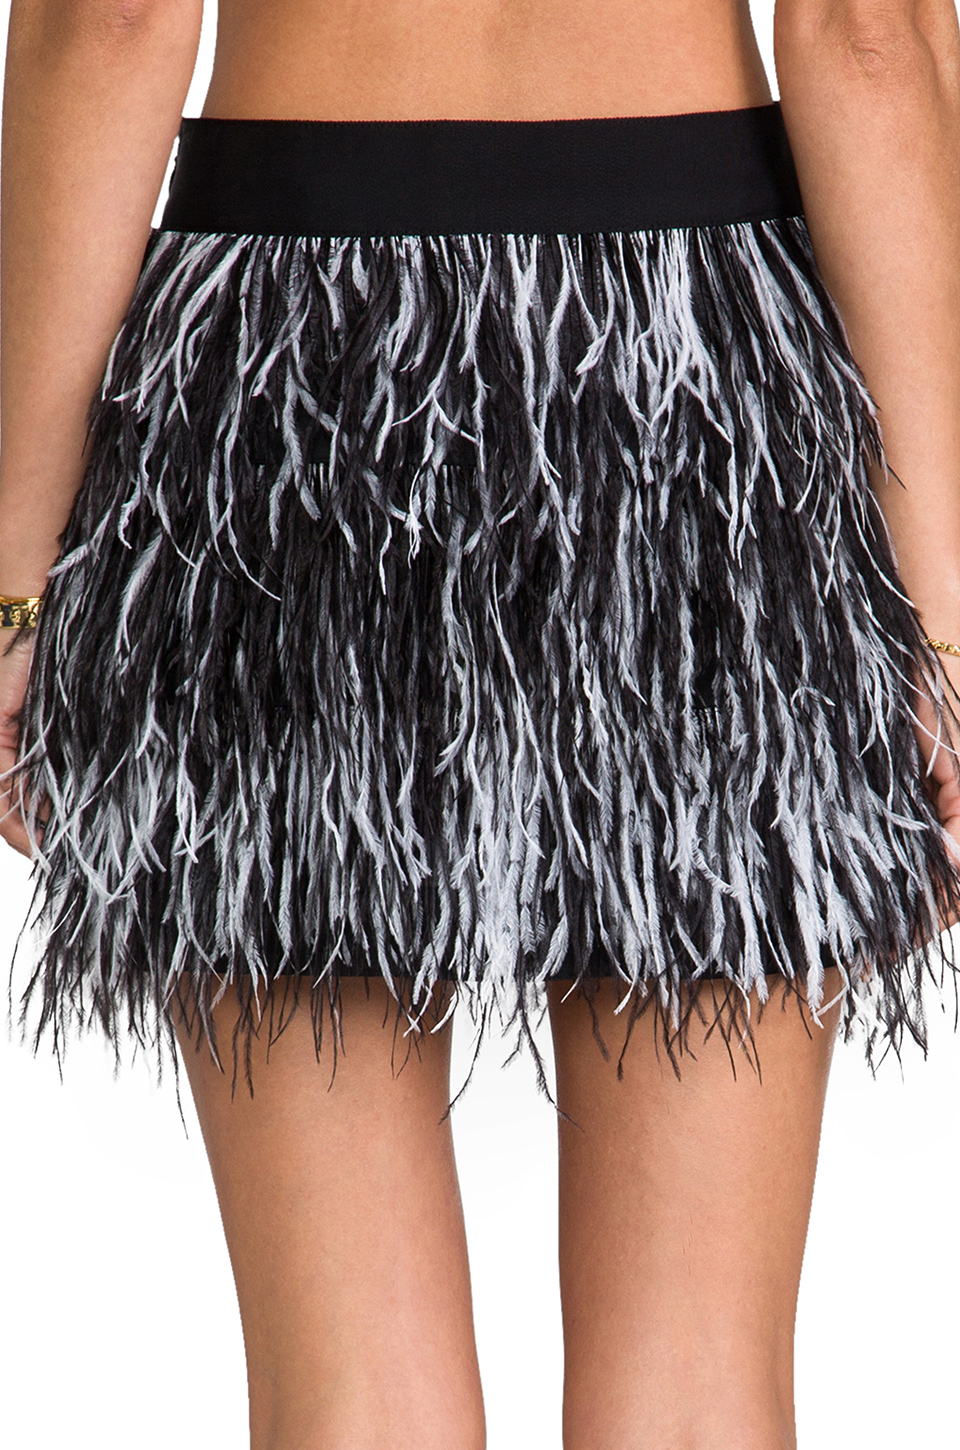 Lyst - Milly Cocktail Ostrich Fringe Skirt in Black in Gray